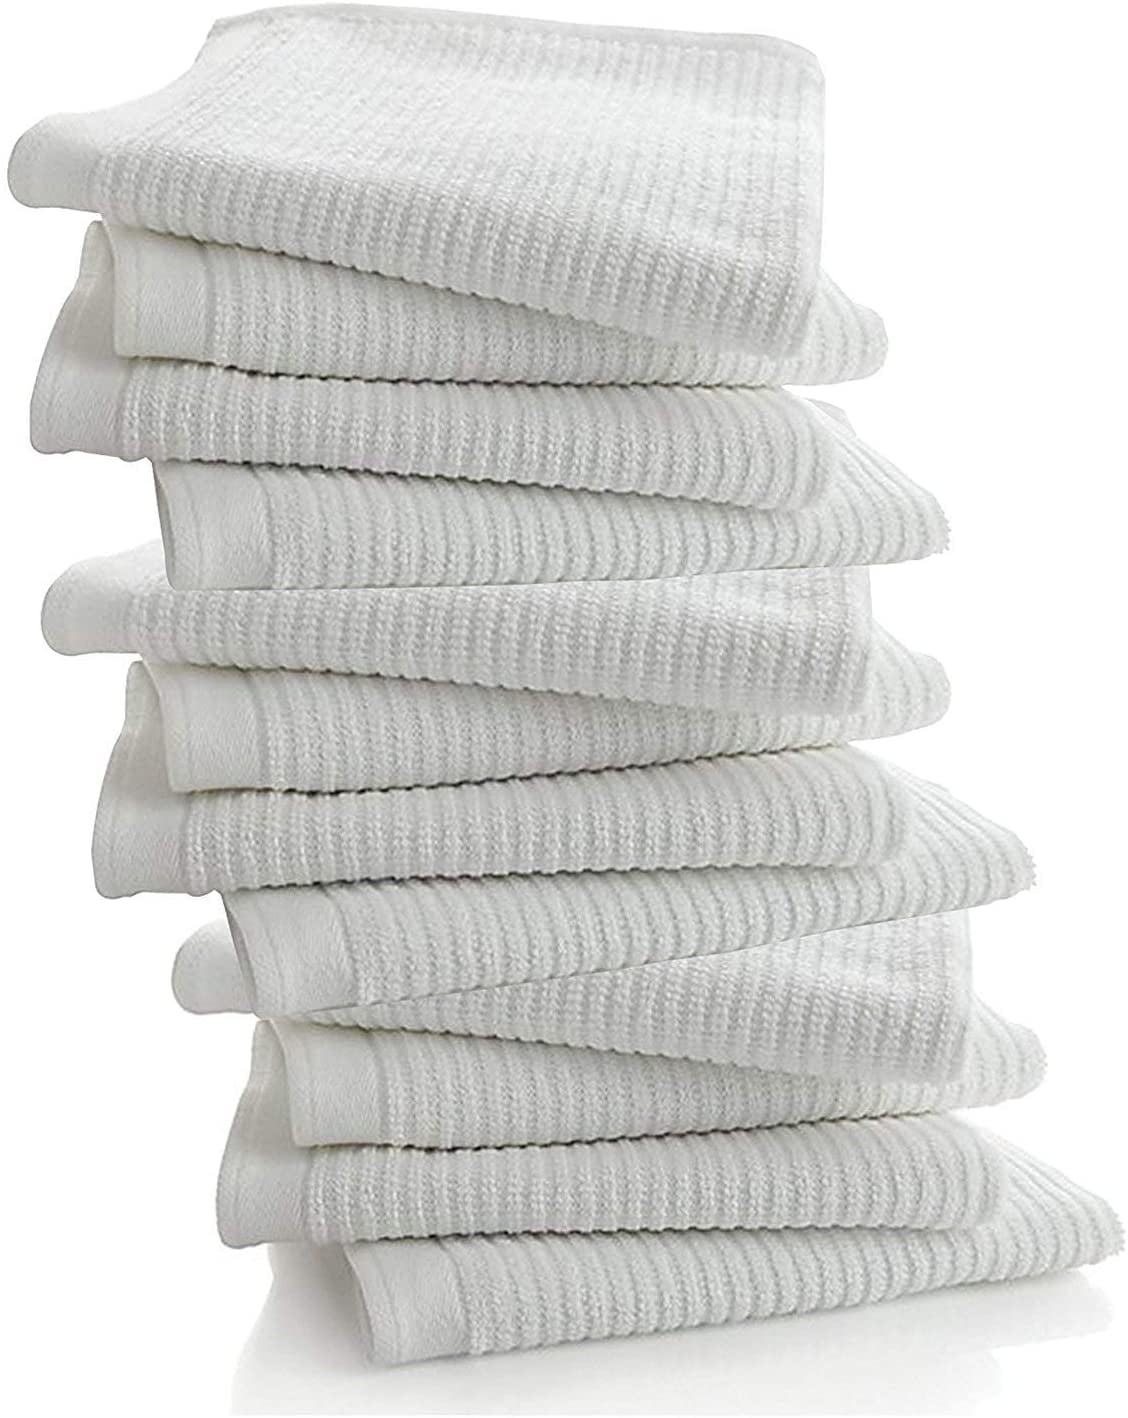 Green Multipurpose Towels Avalon Towels Terry Bar Mop Towels Value Pack of 60 Cotton Cleaning Rags Restaurant Towels Kitchen Towels Size 14x17 – Absorbent and Durable Reusable Shop Rags 